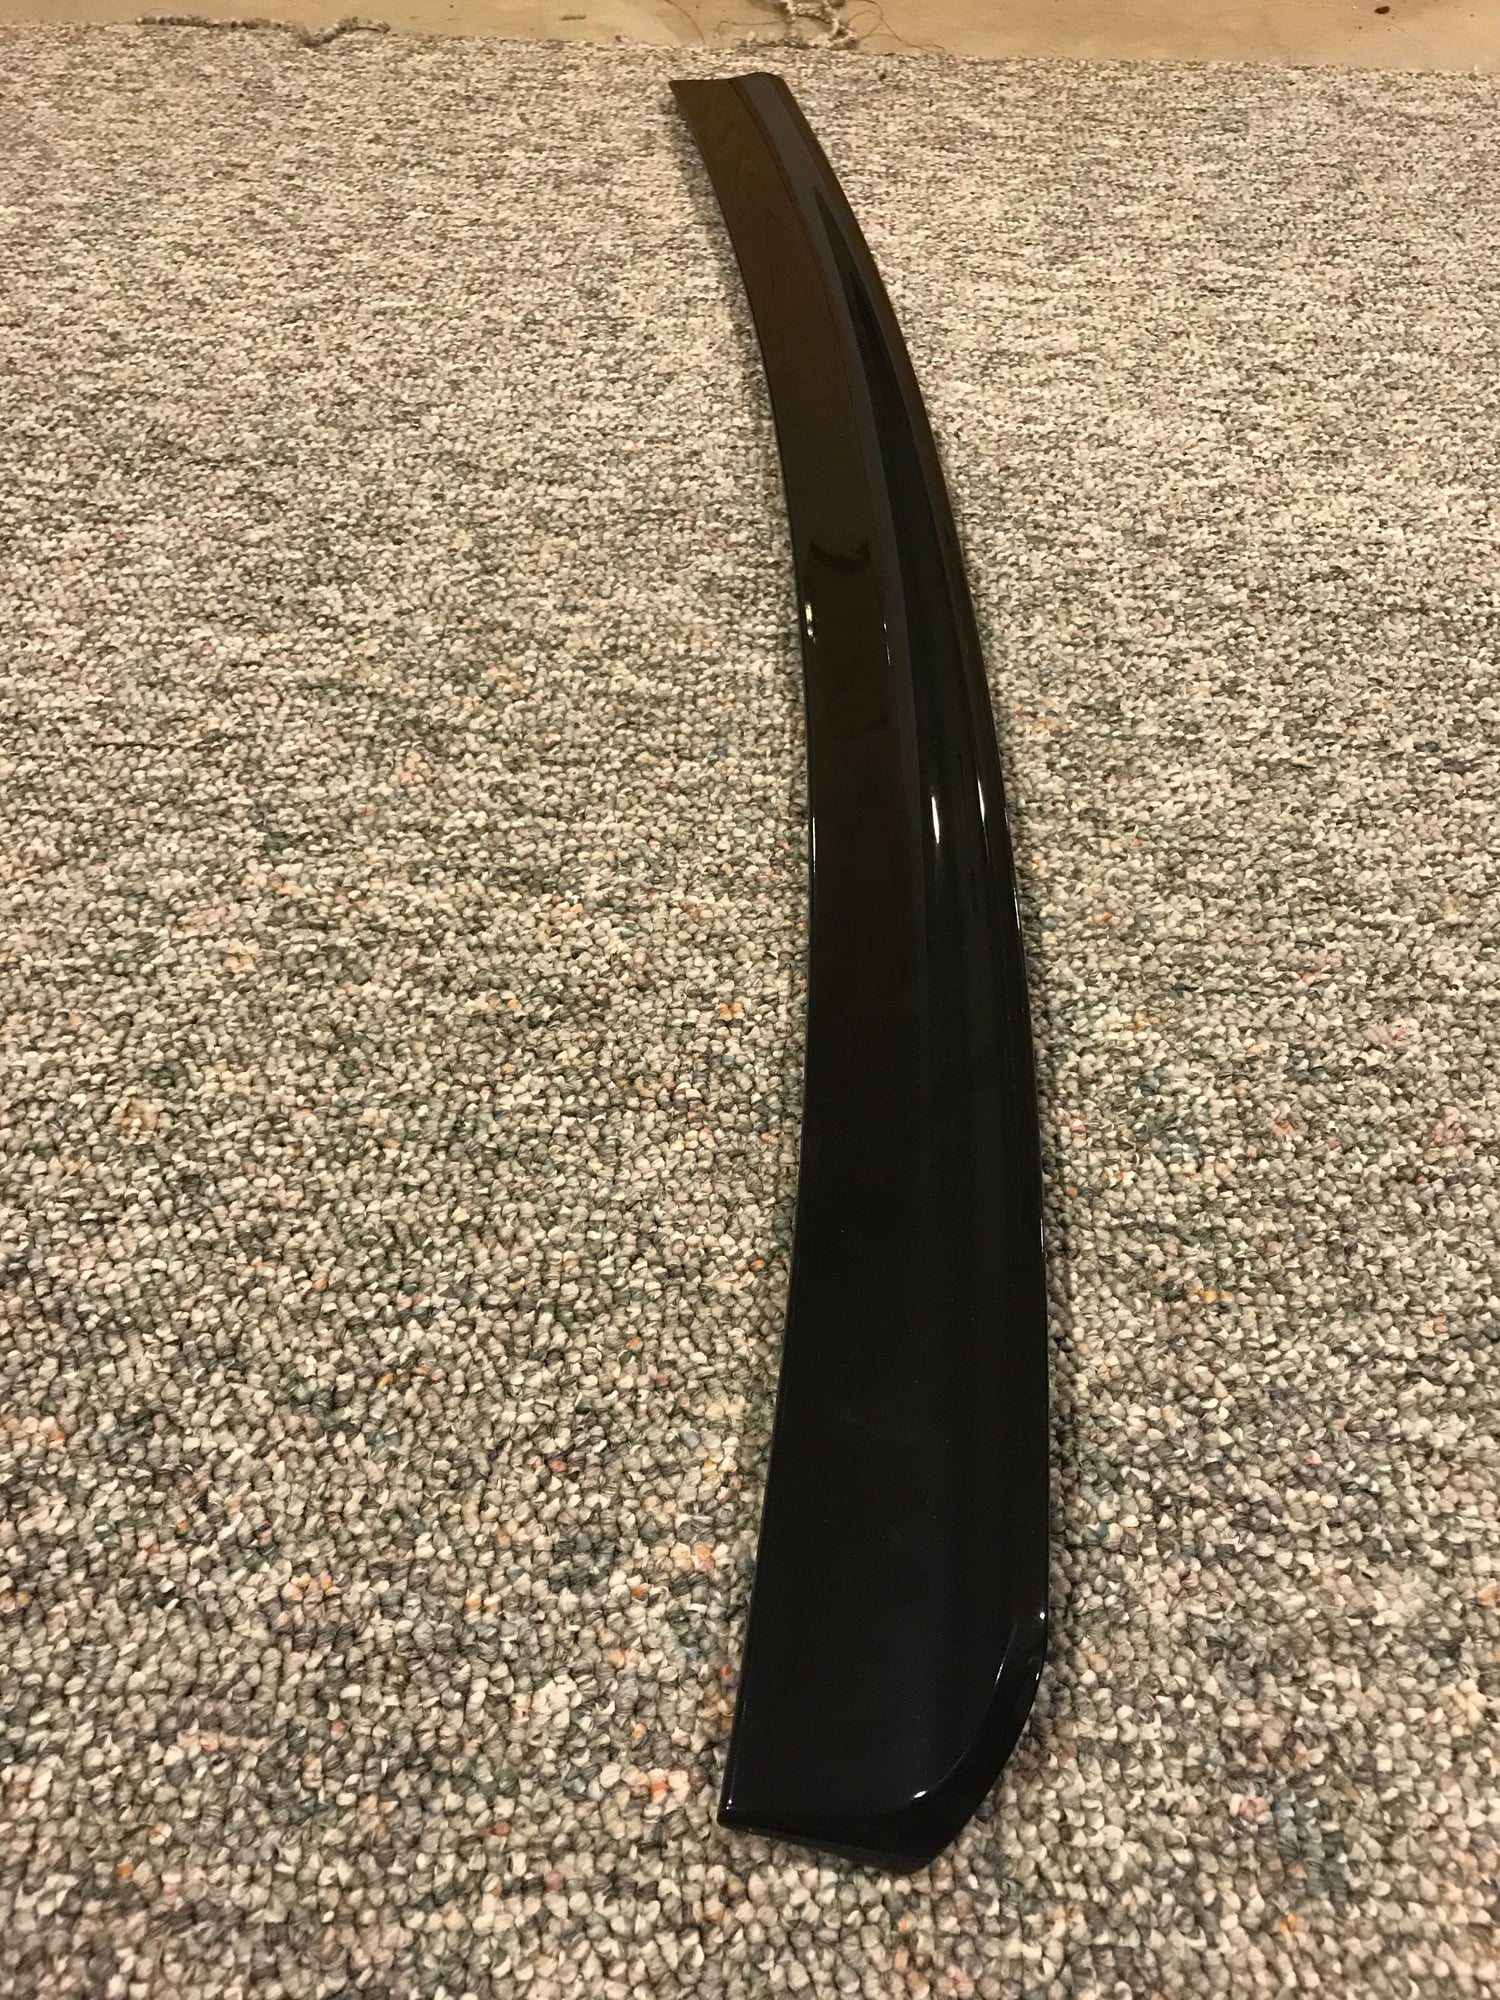 Exterior Body Parts - SOLD: EndlessRPM 3G TL Roof Spoiler (Painted) - Used - 2004 to 2008 Acura TL - Monroe, NY 10950, United States